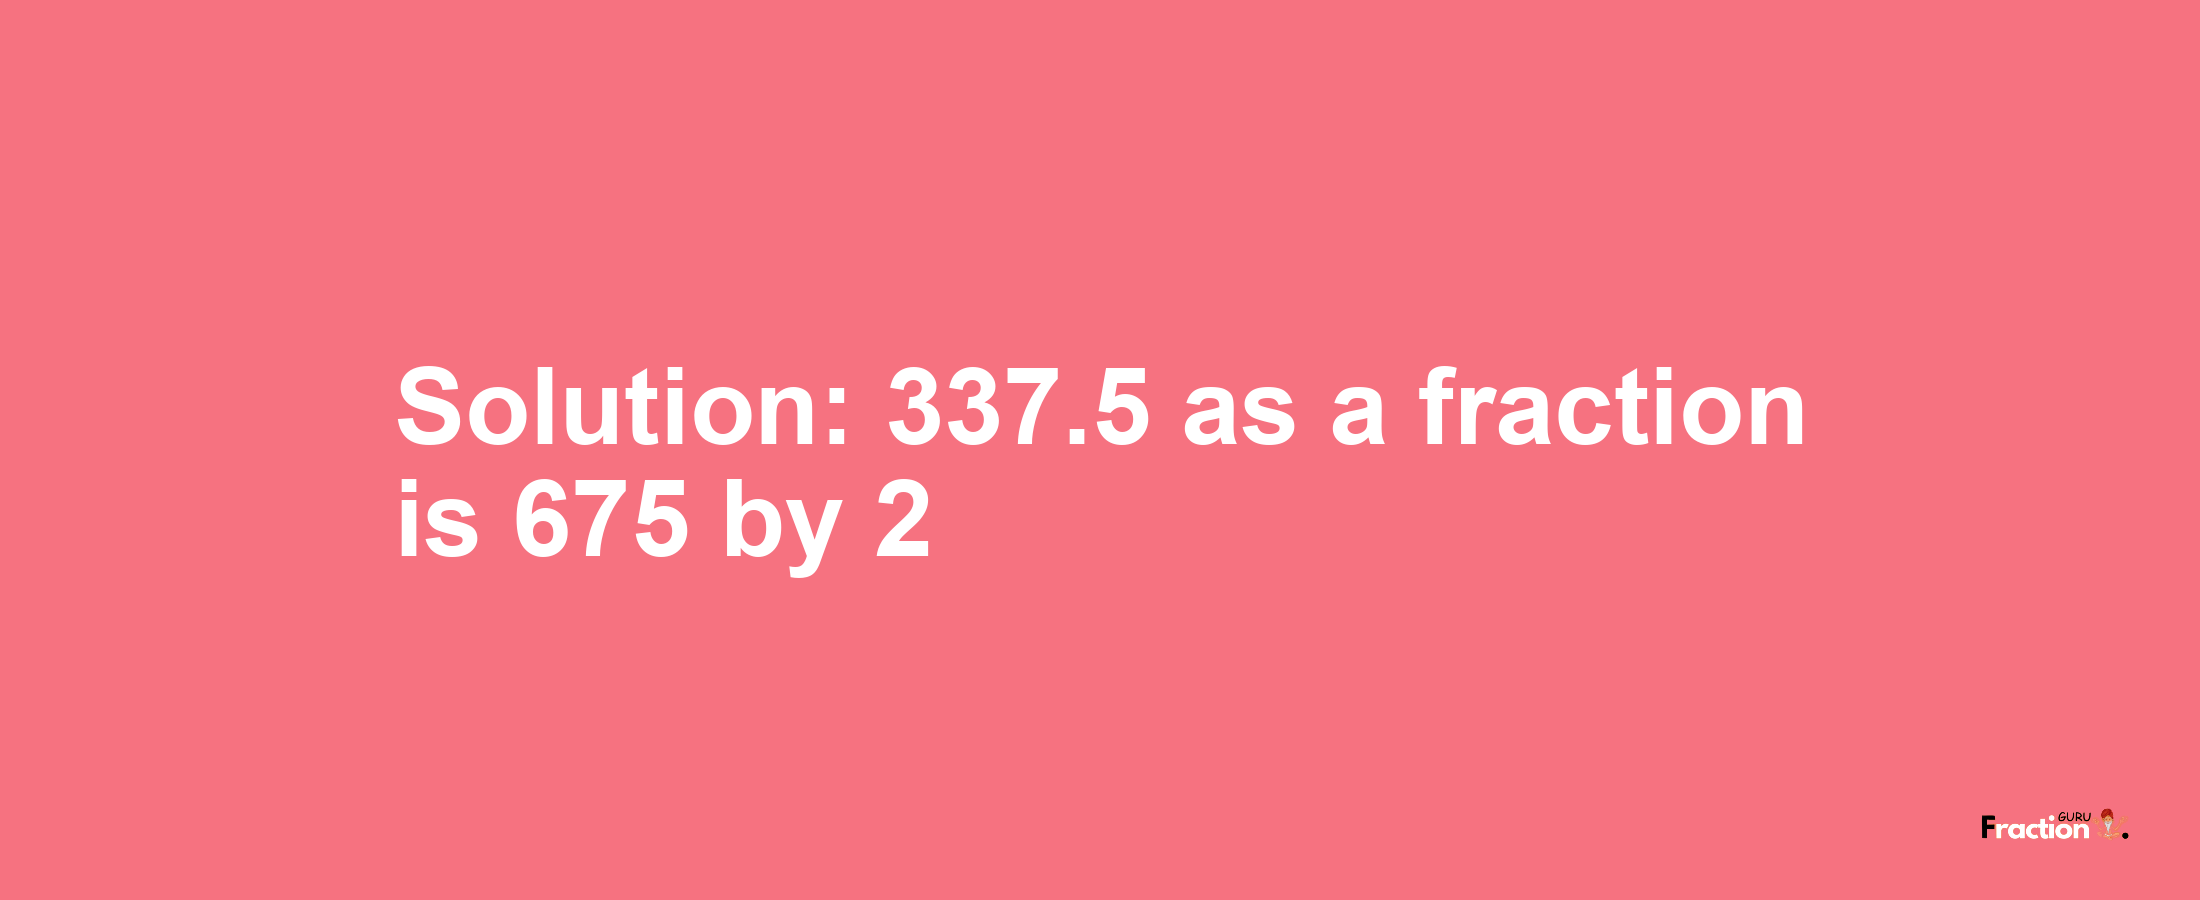 Solution:337.5 as a fraction is 675/2